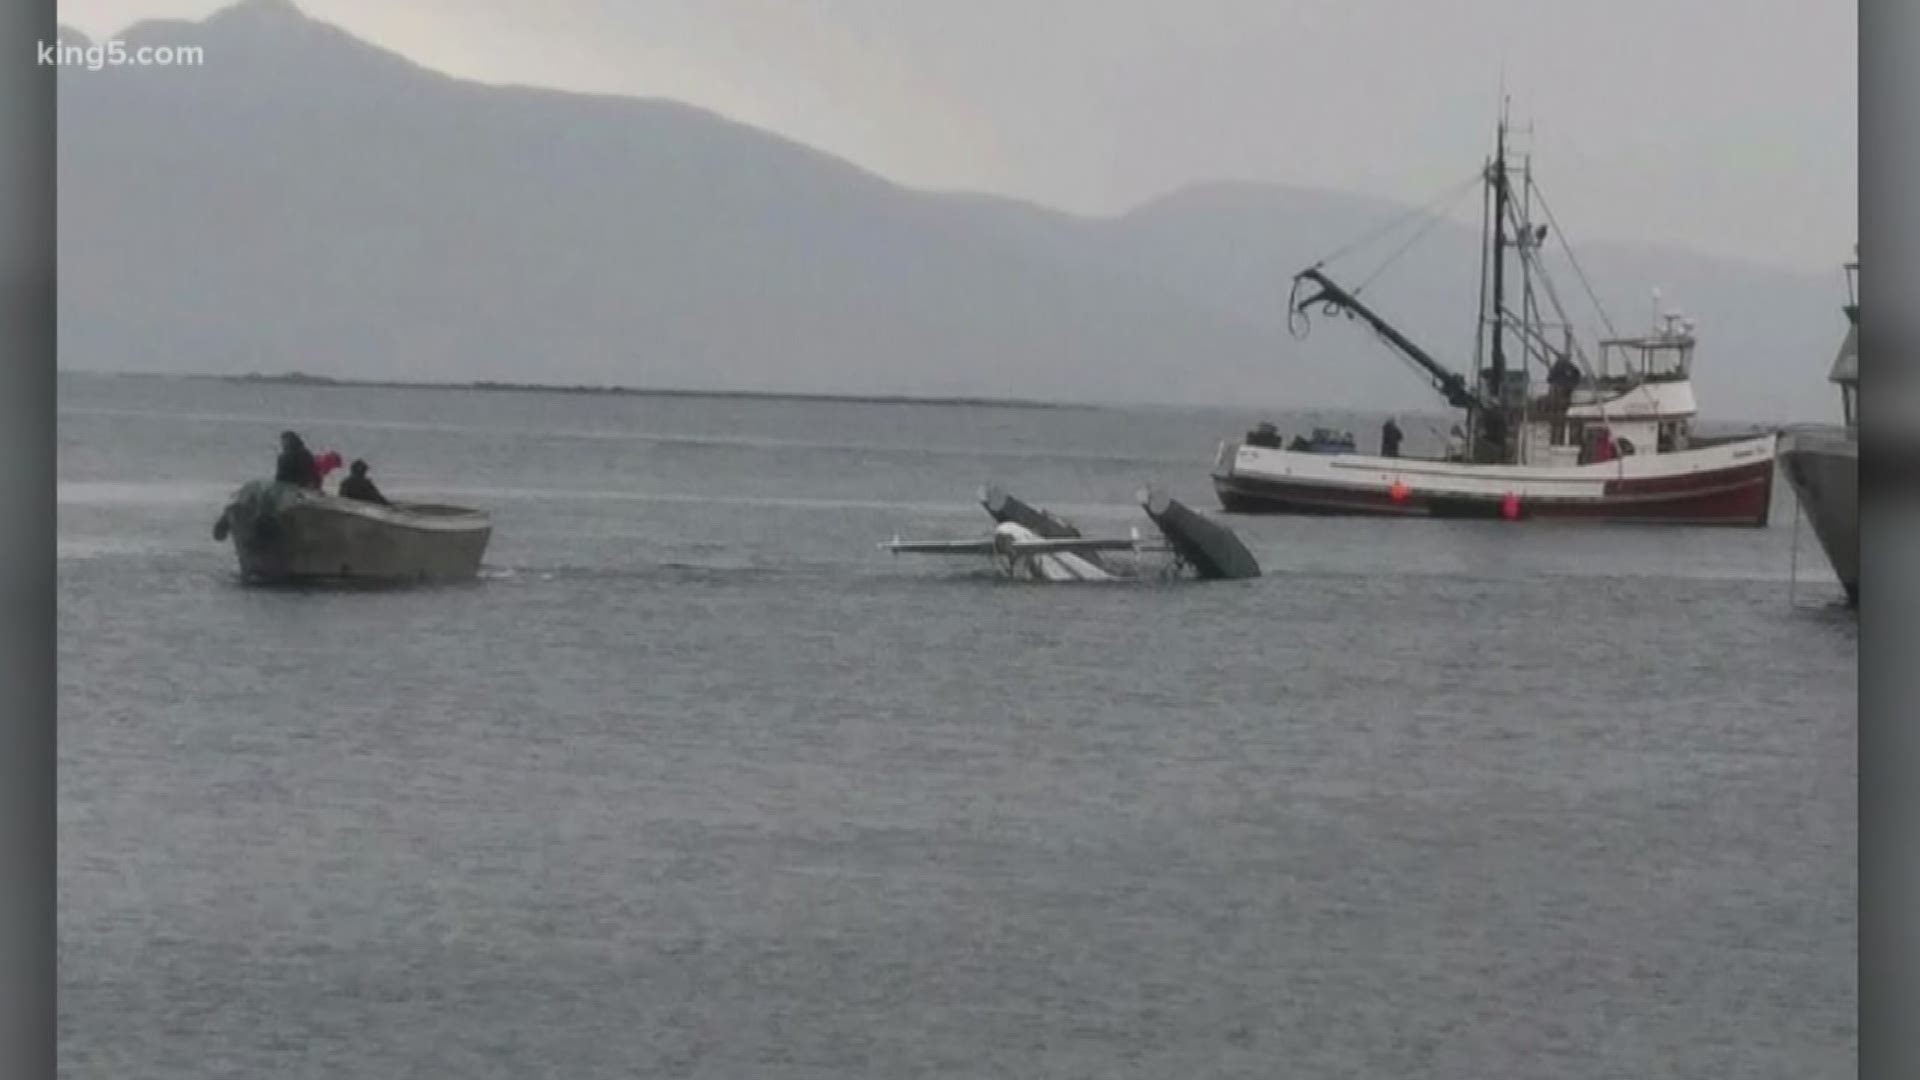 A pilot and passenger are dead after a floatplane operated by Taquan Air crashed off the Alaskan coast Monday.